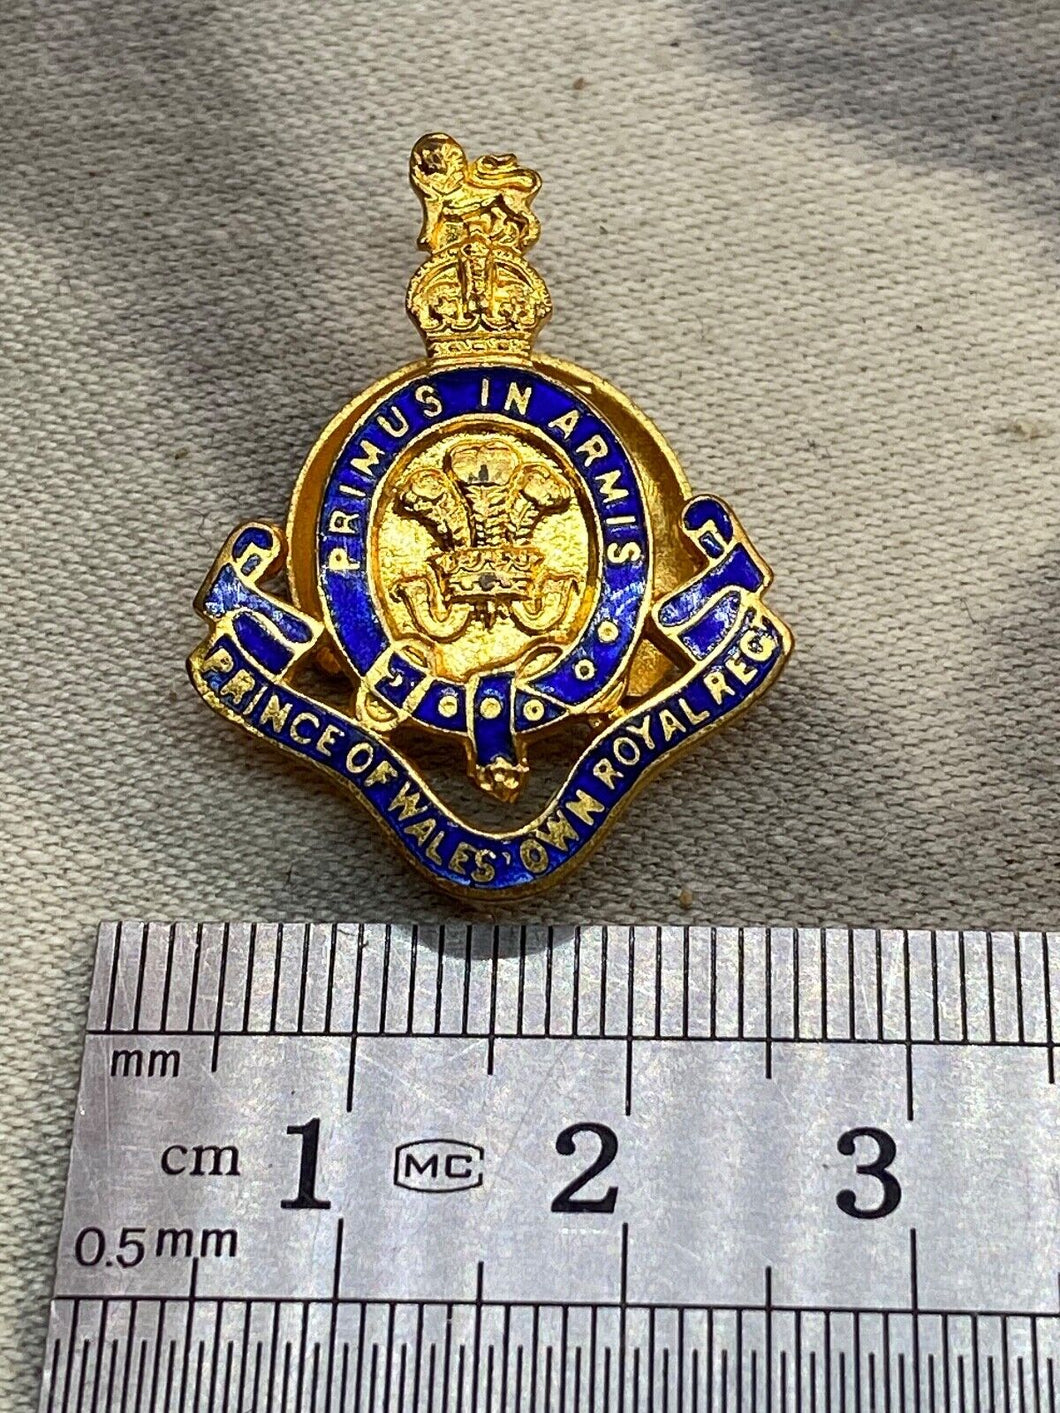 Original British Army - Prince of Wales's Own Royal Regiment Sweetheart Brooch